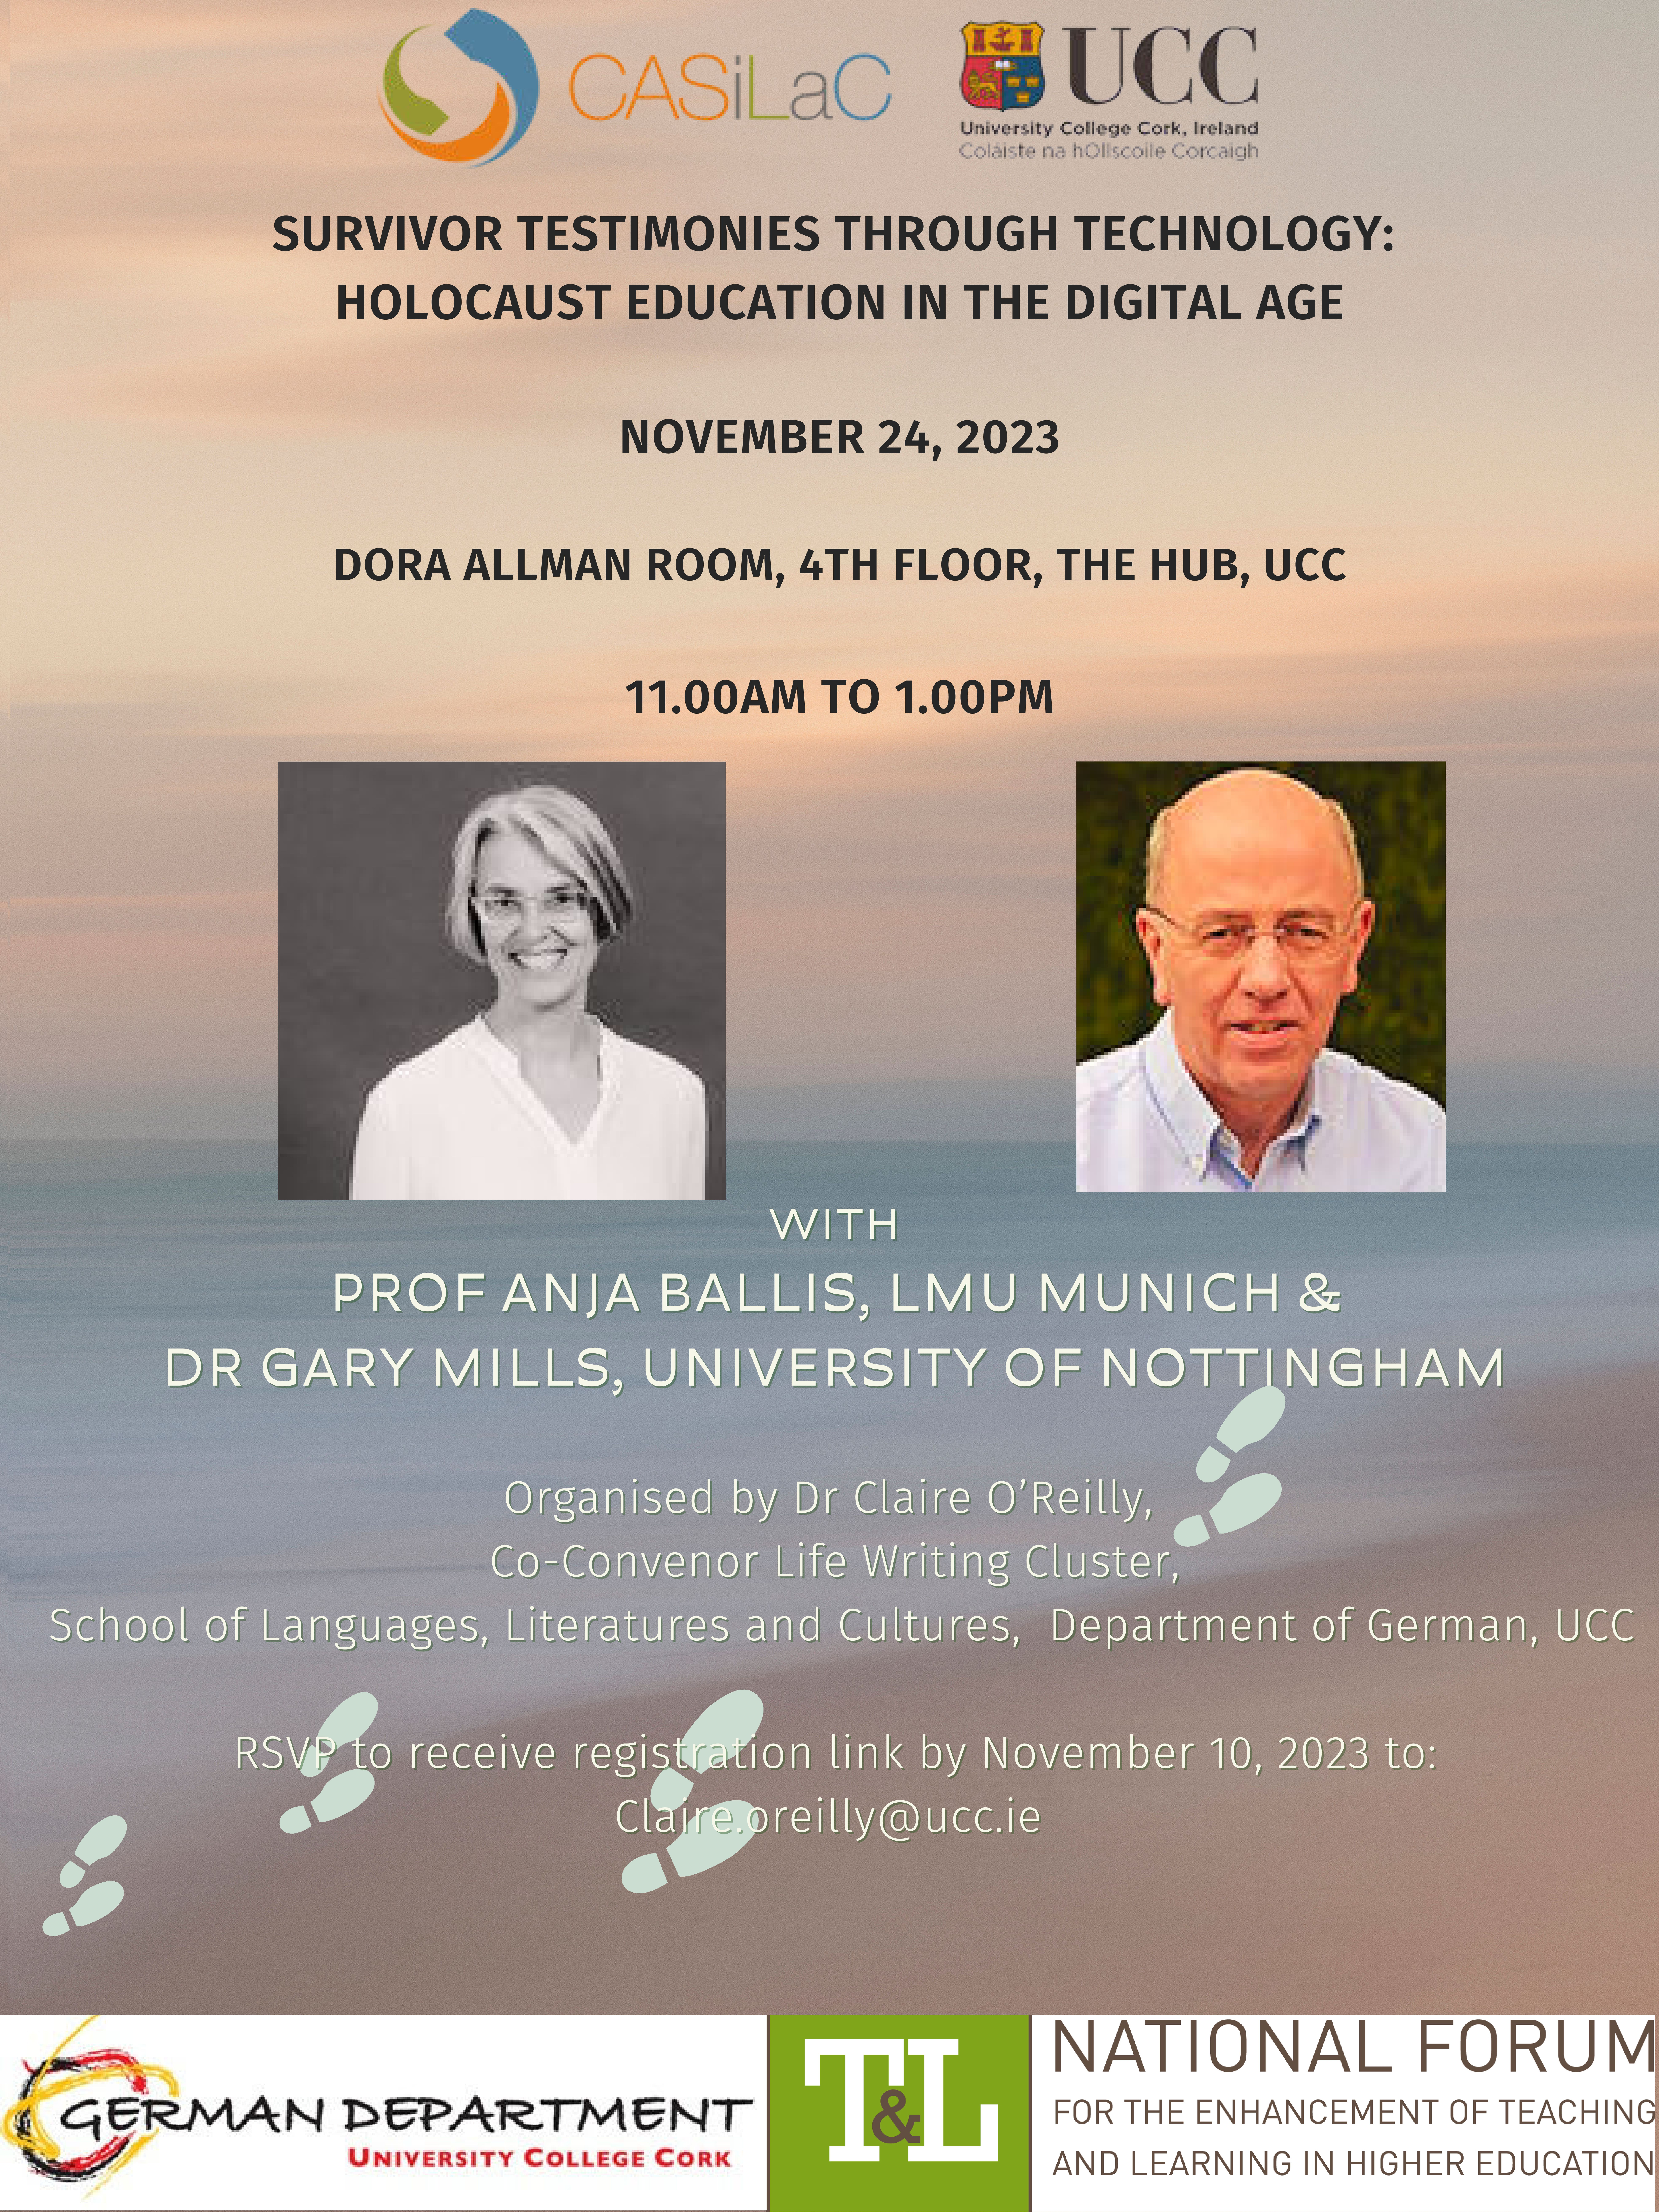 Holocaust Education in the Digital Age